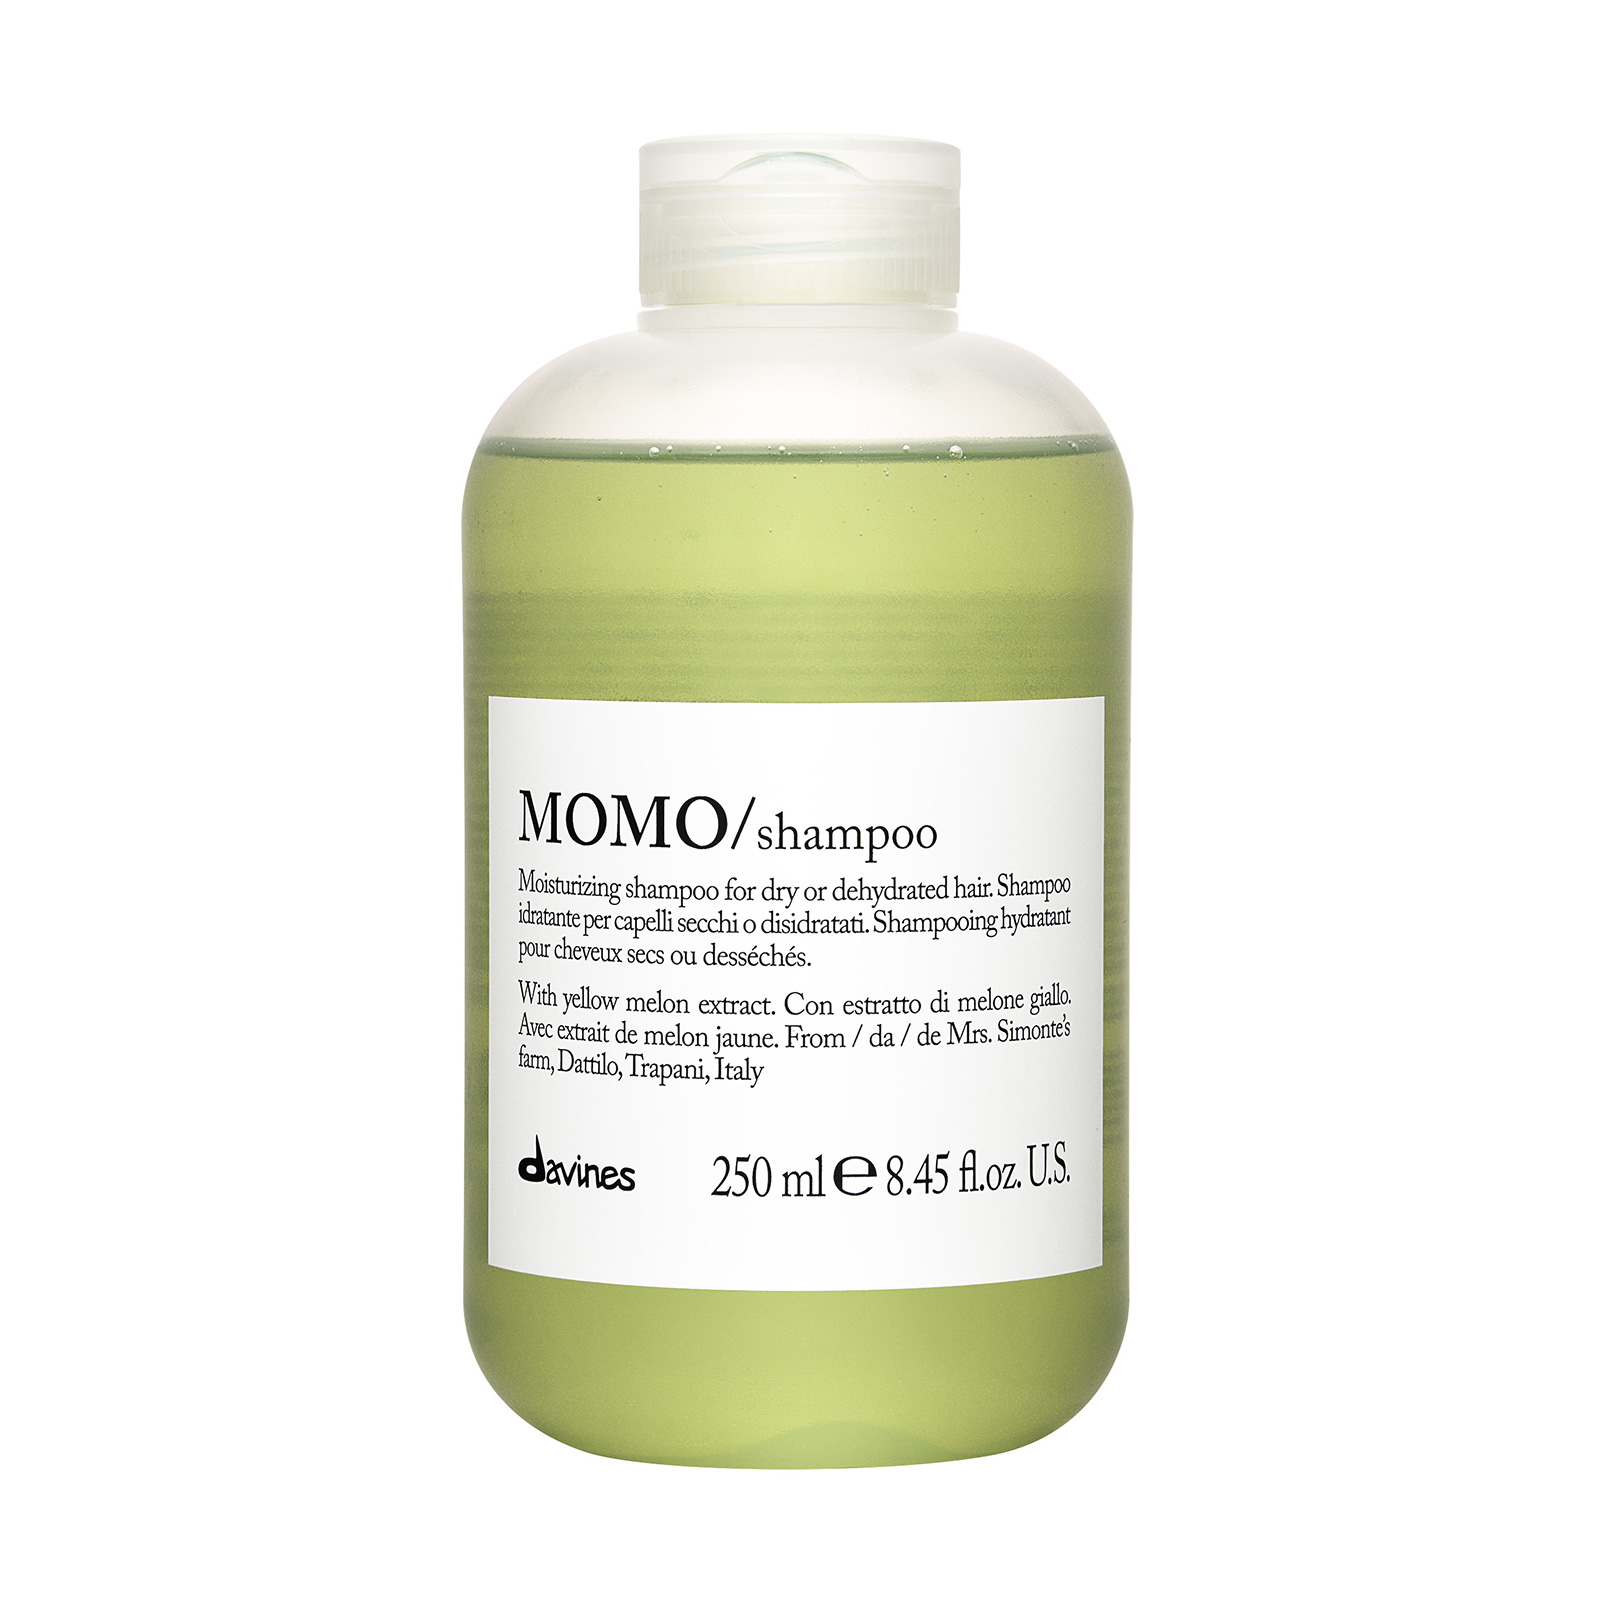 Momo Shampoo (for Dry or Dehydrated Hair)